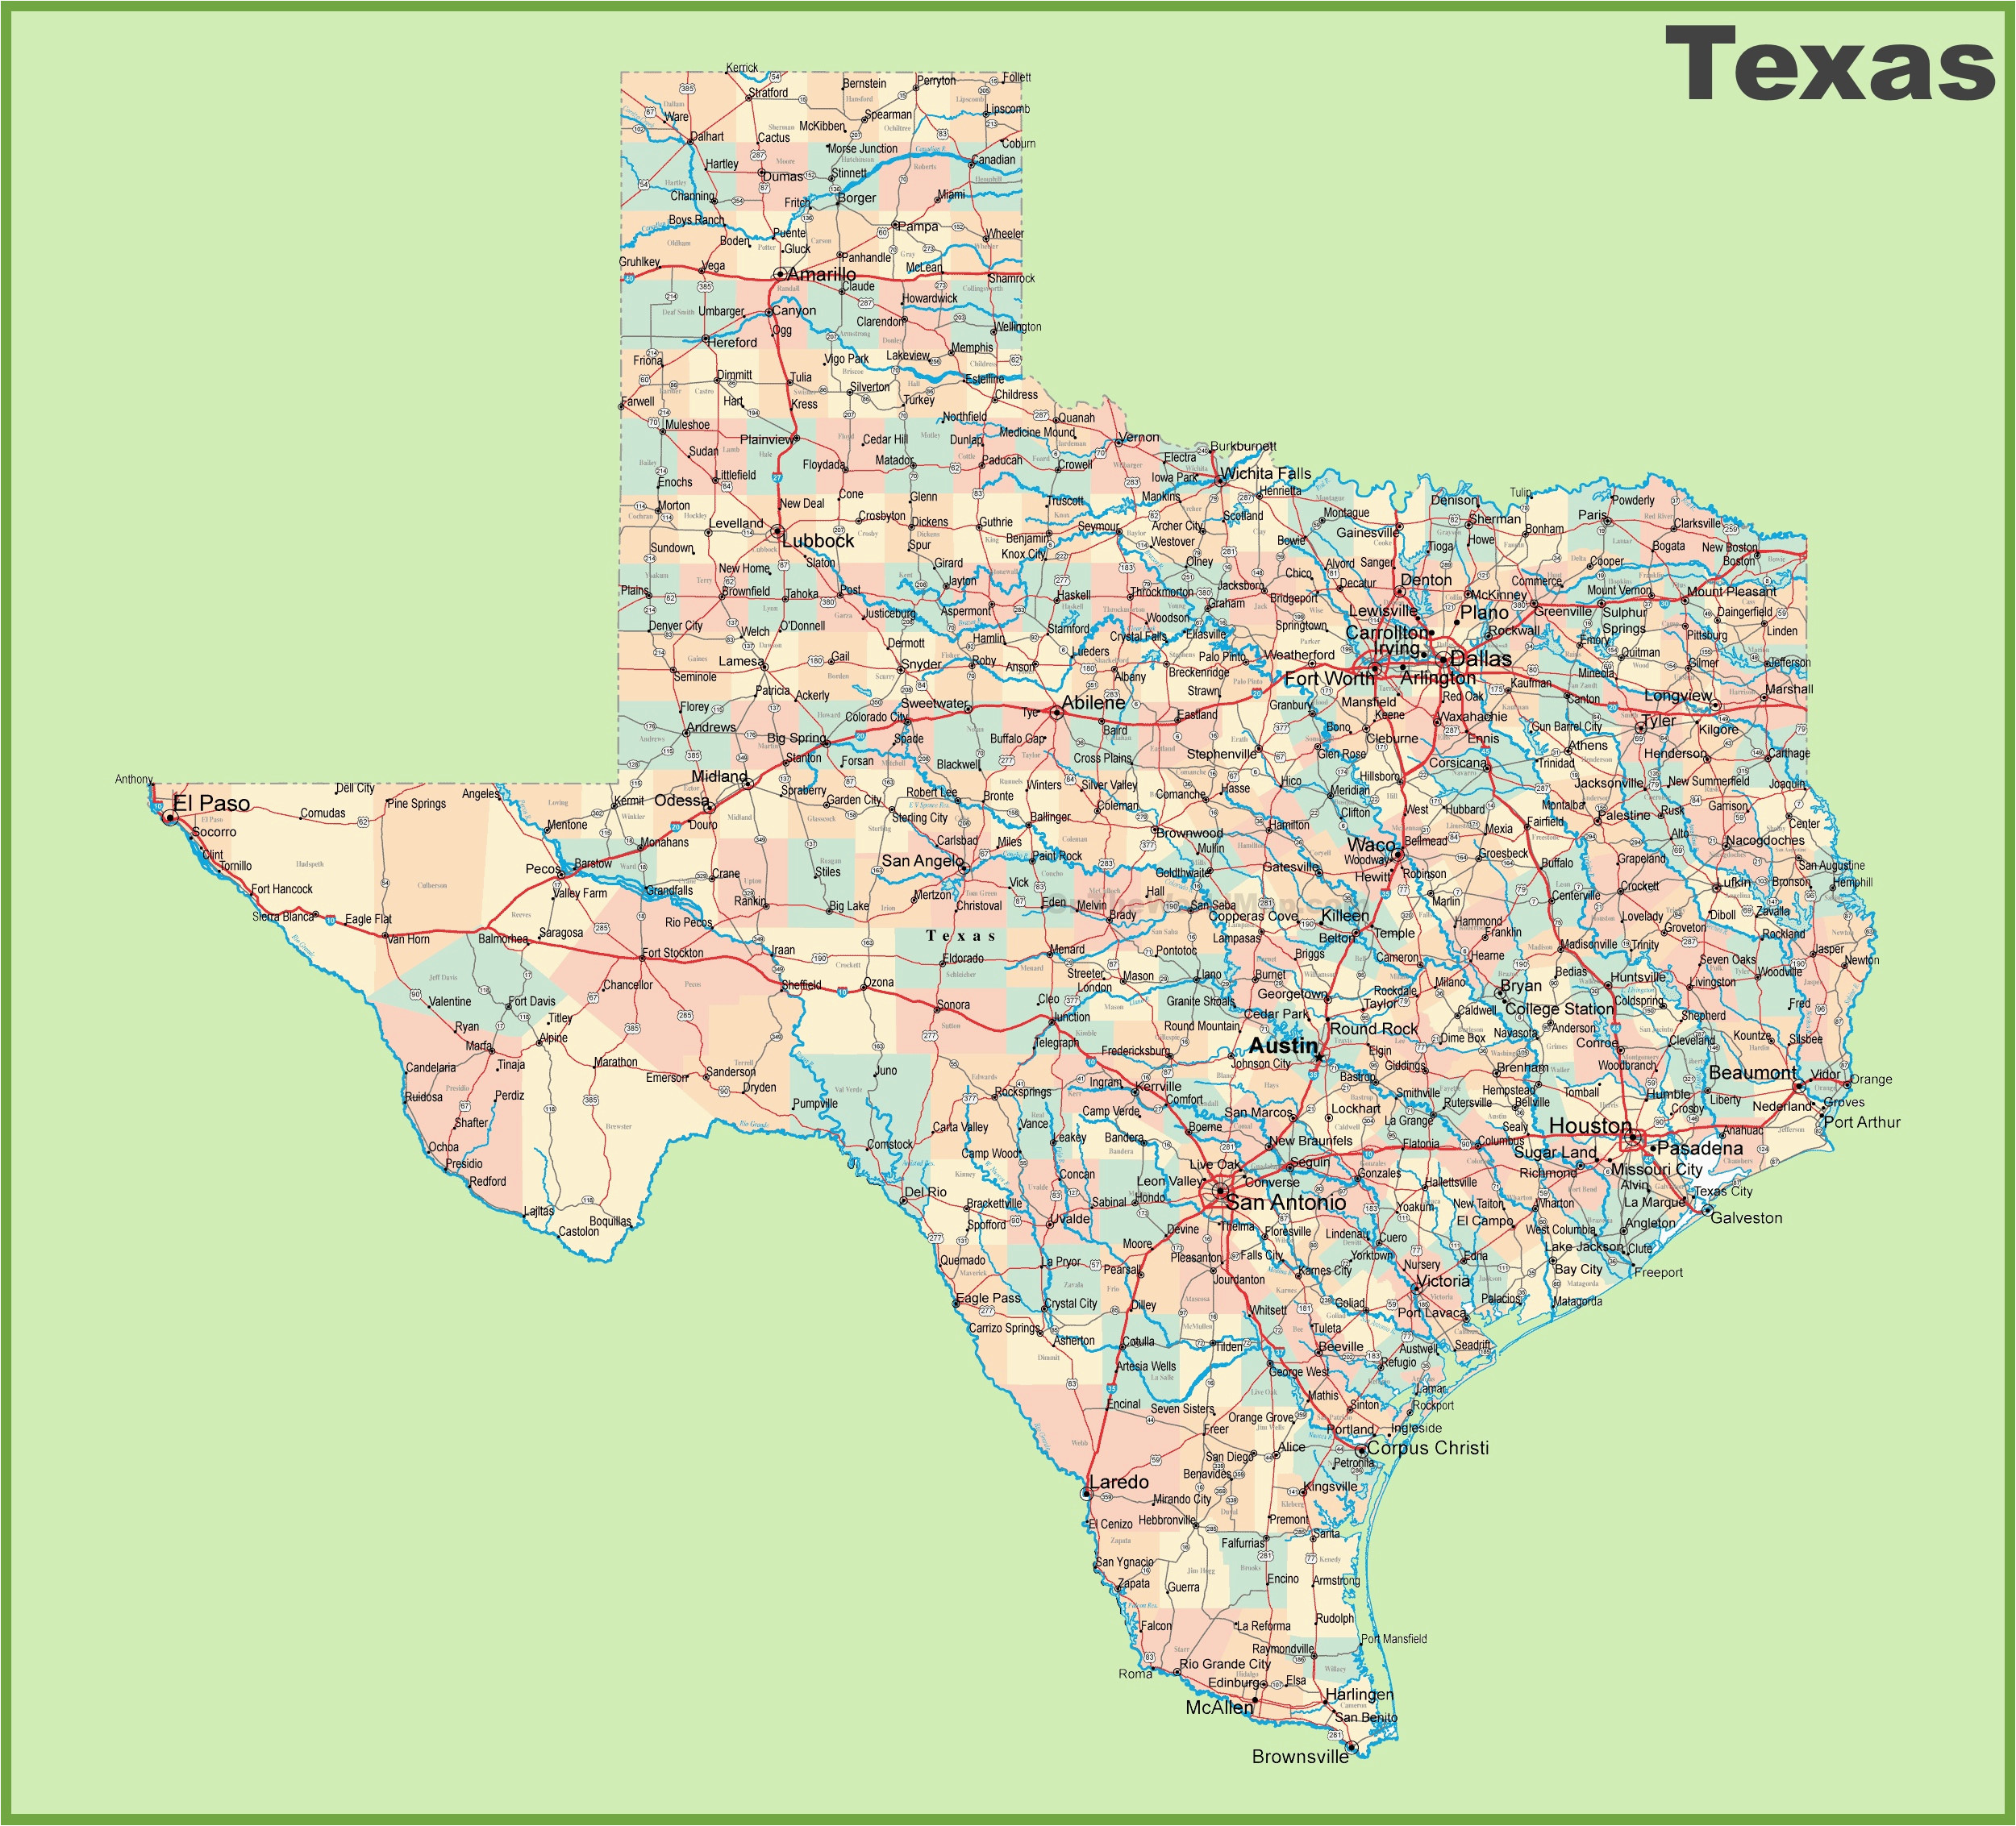 Texas Road Maps Free Road Map Of Texas with Cities